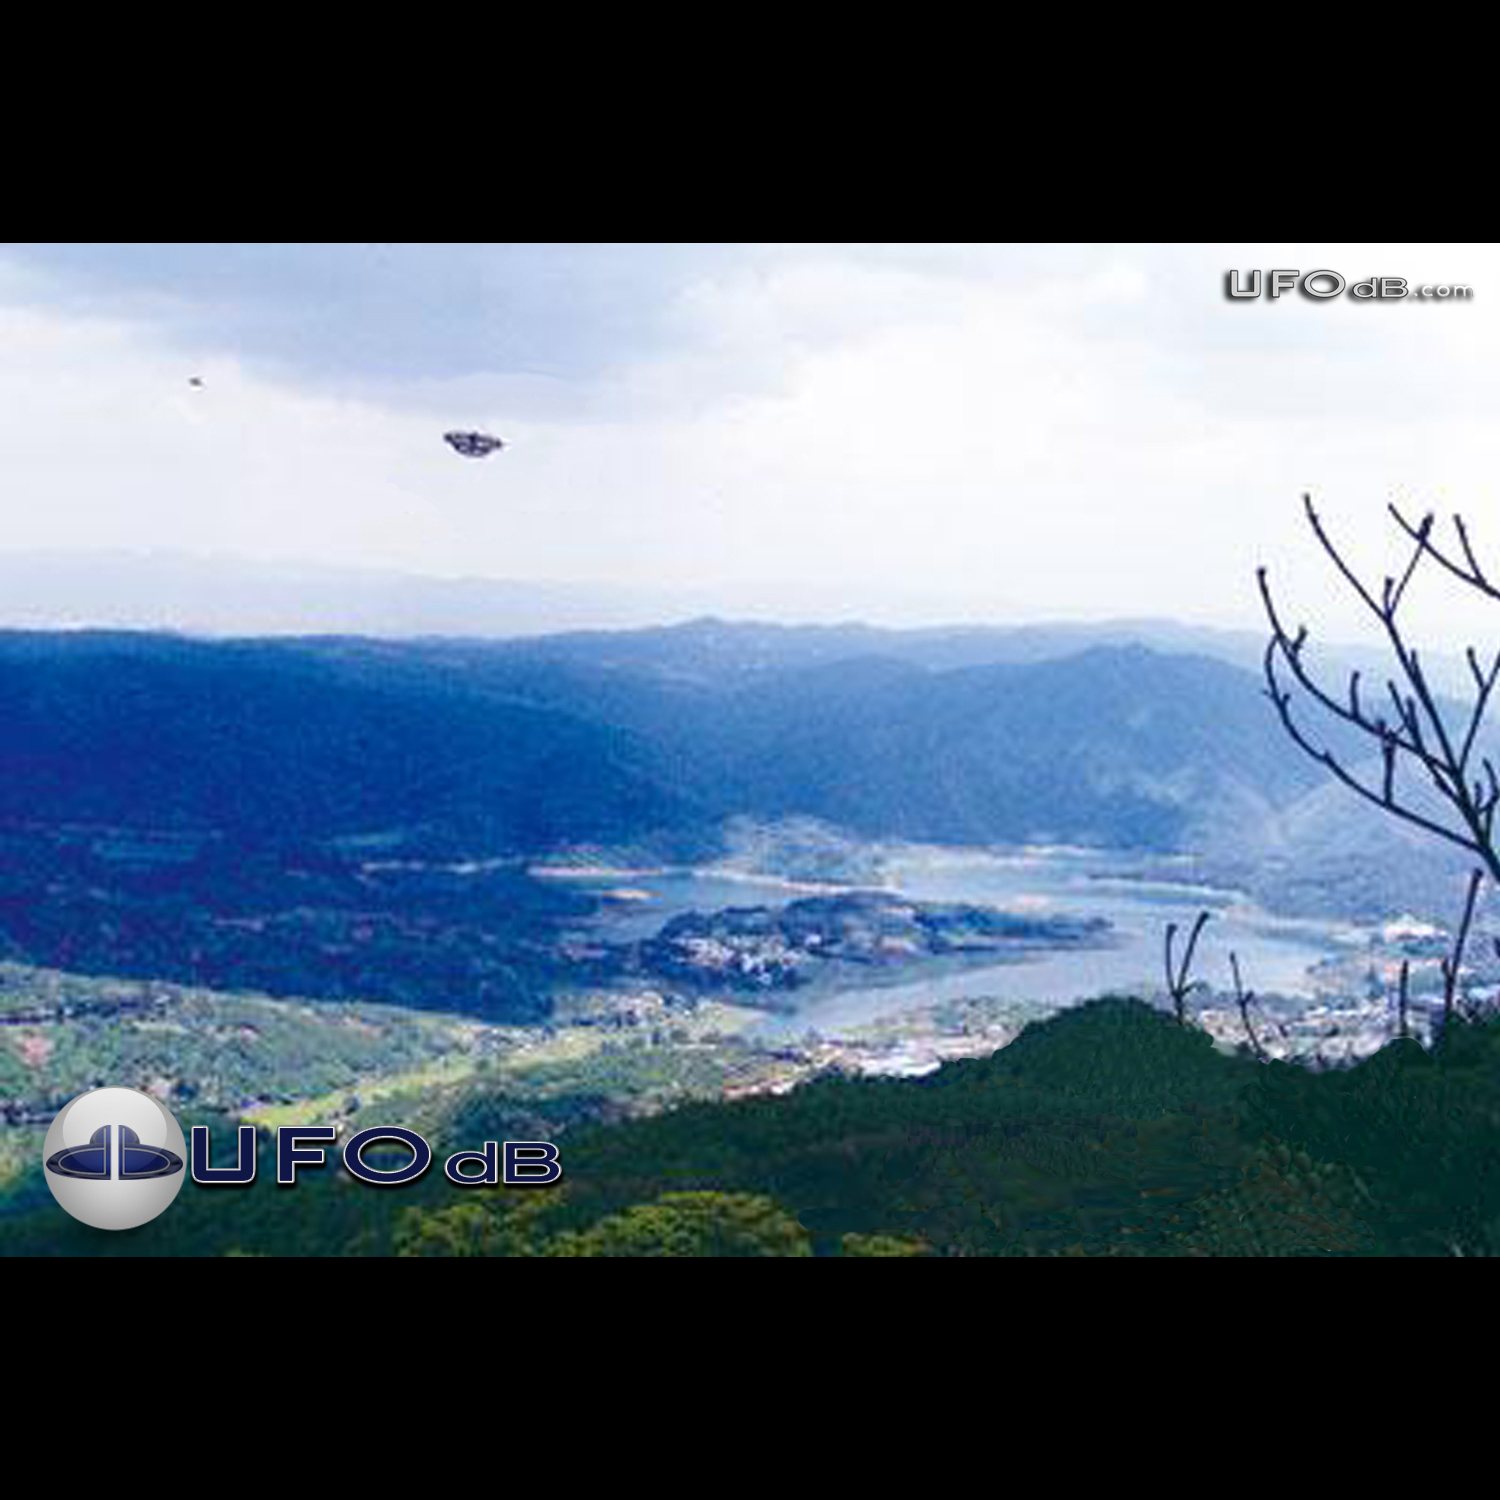 Songhua Ba Reservoir visited by a UFO | Kunming, China | May 22 2011 UFO Picture #341-1